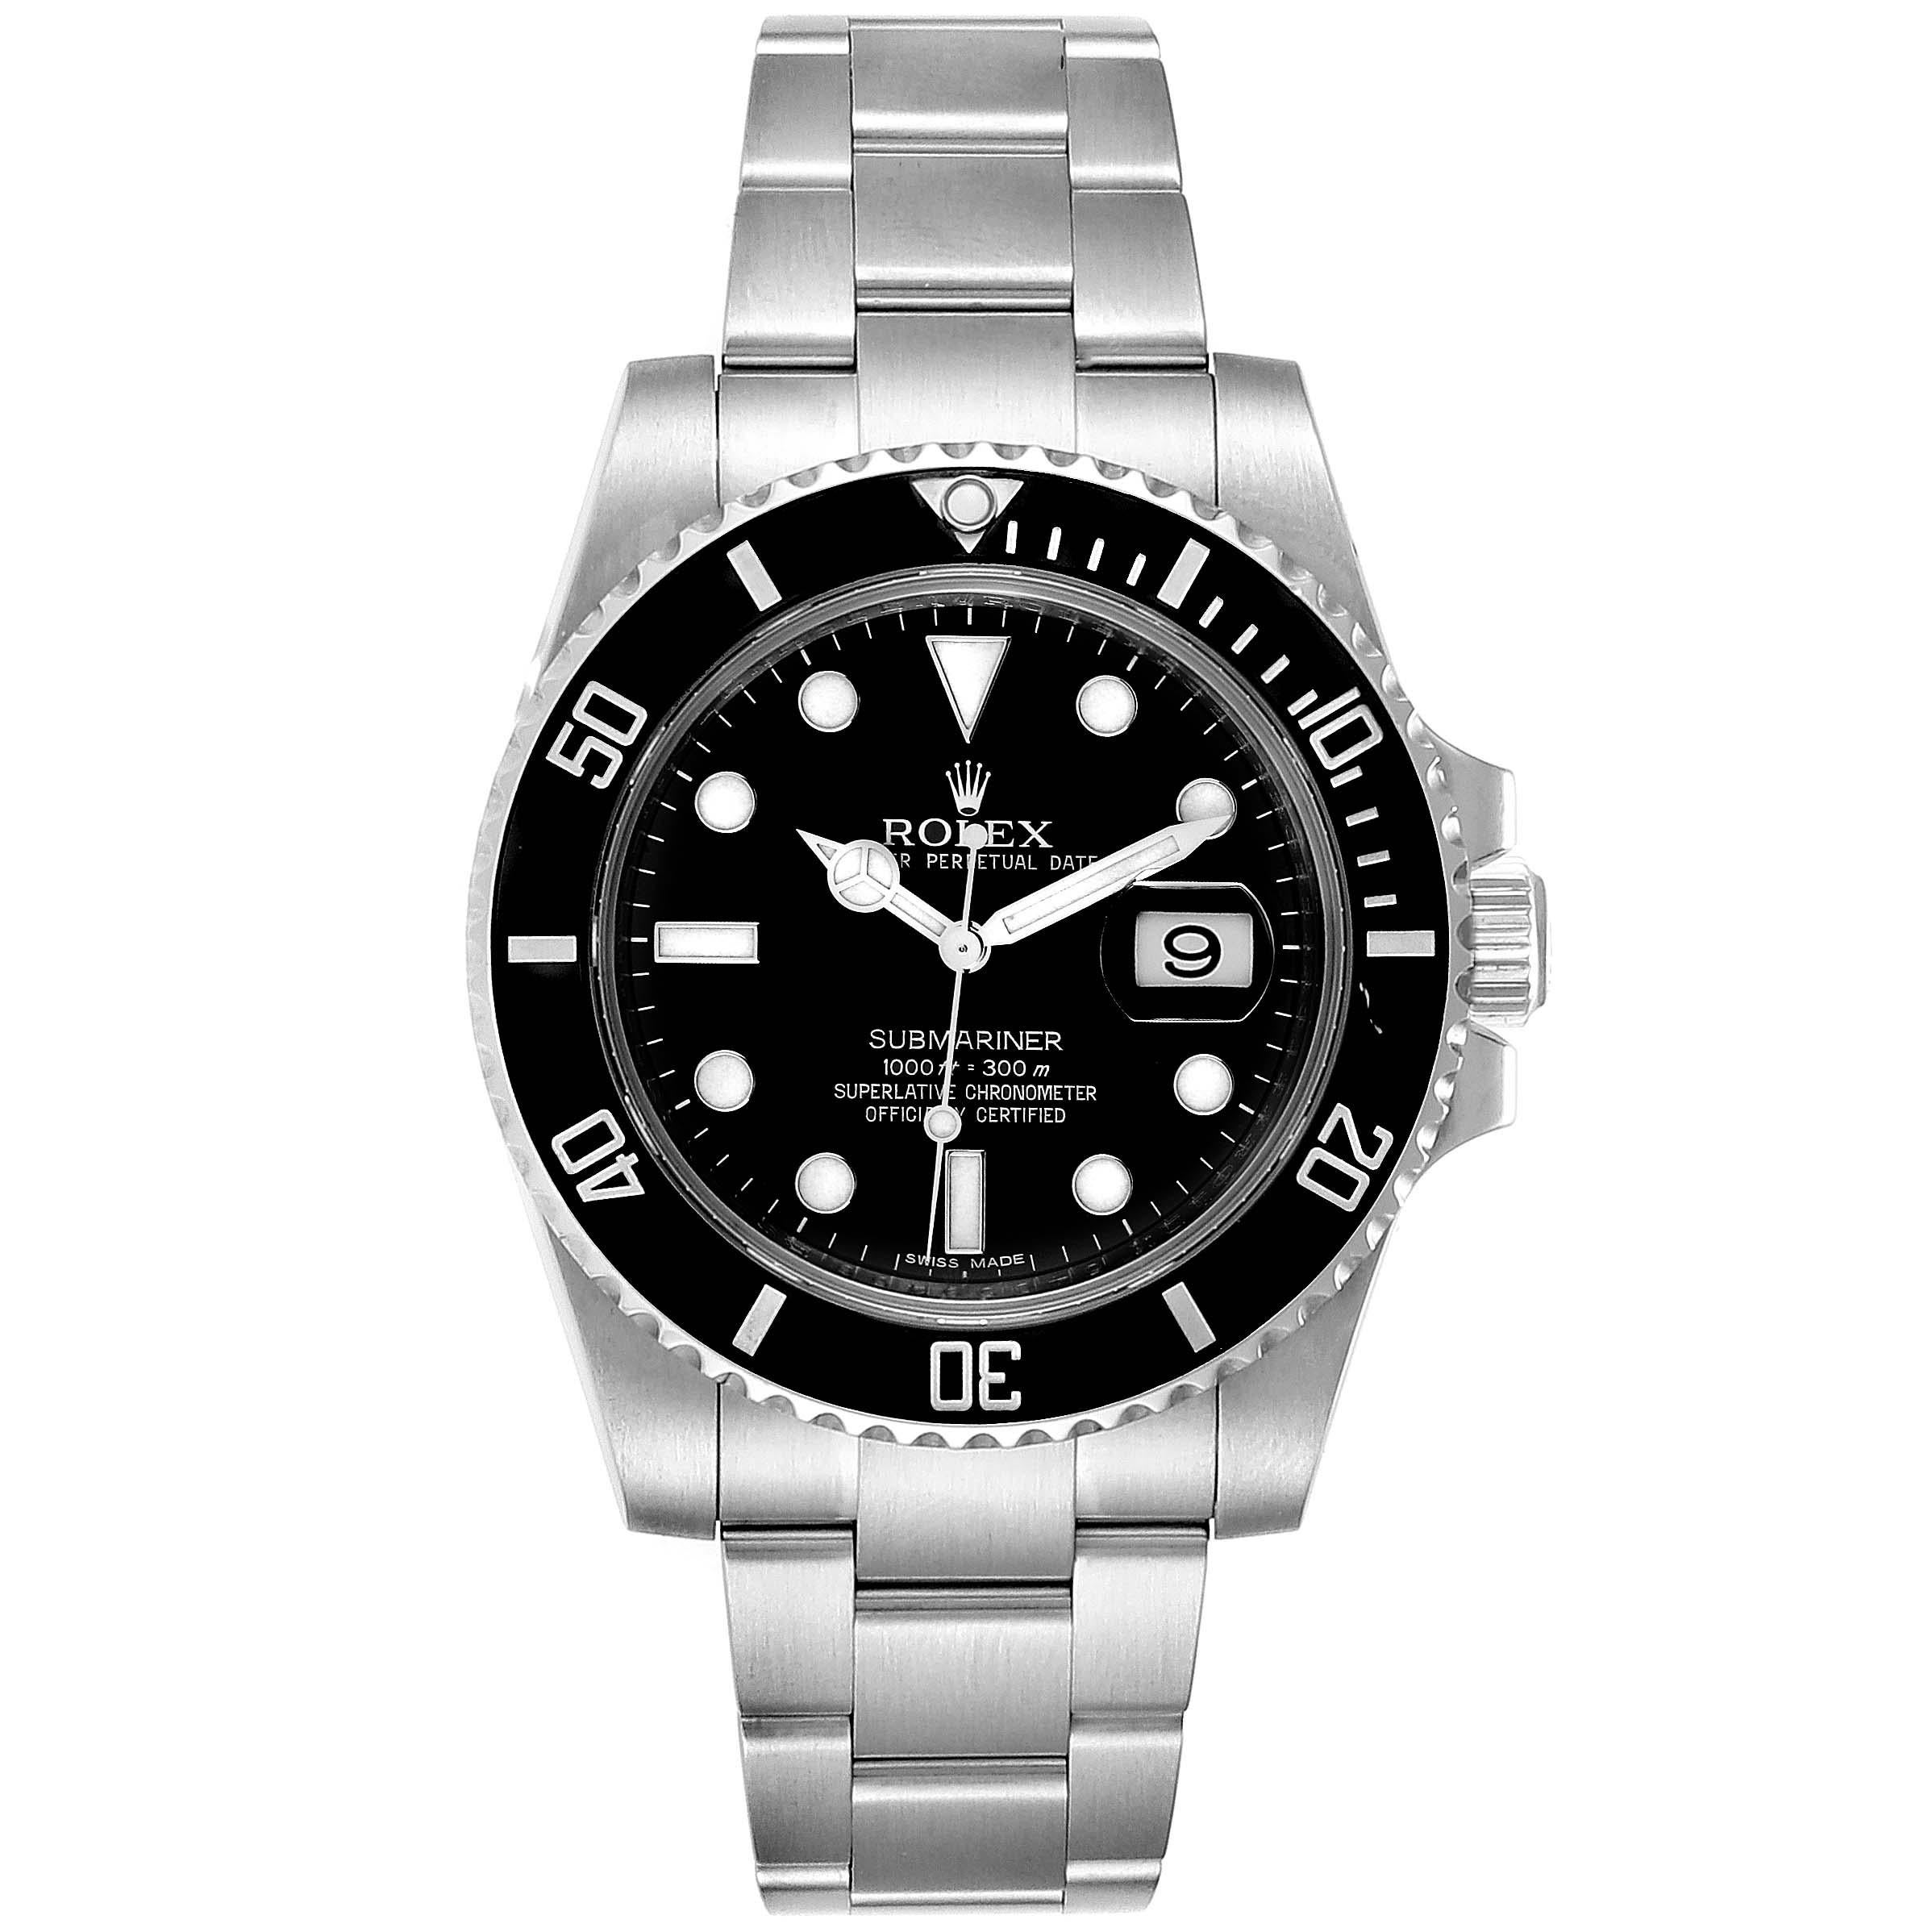 Rolex Submariner 40 Cerachrom Bezel Black Dial Watch 116610 Box Card. Officially certified chronometer self-winding movement. Stainless steel case 40 mm in diameter. Rolex logo on a crown. Unidirectional rotating black ceramic bezel with 60 minutes